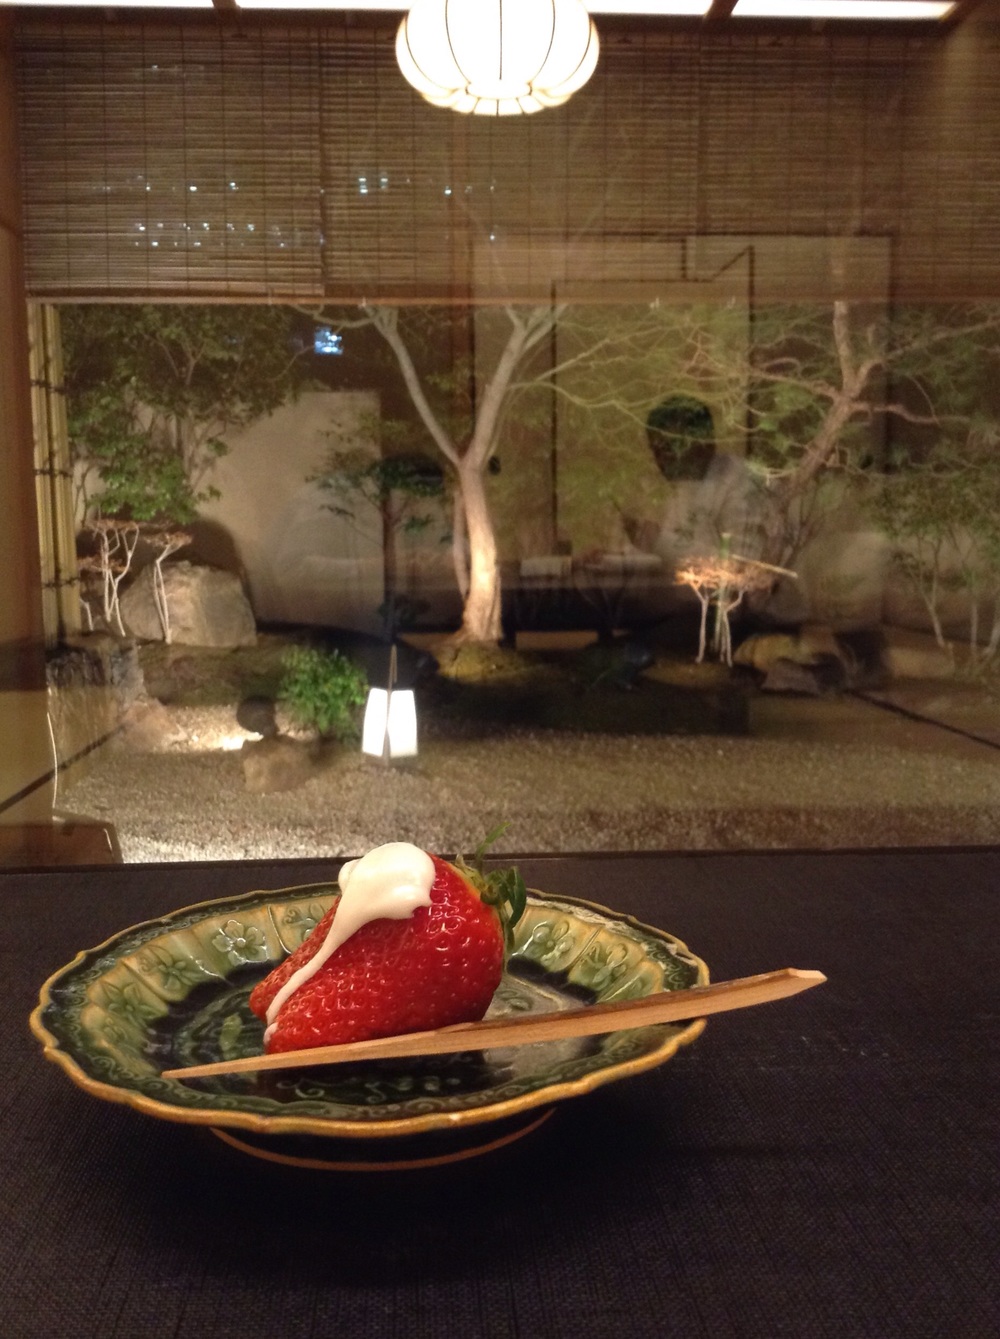  Our dessert last night and the view to the garden 